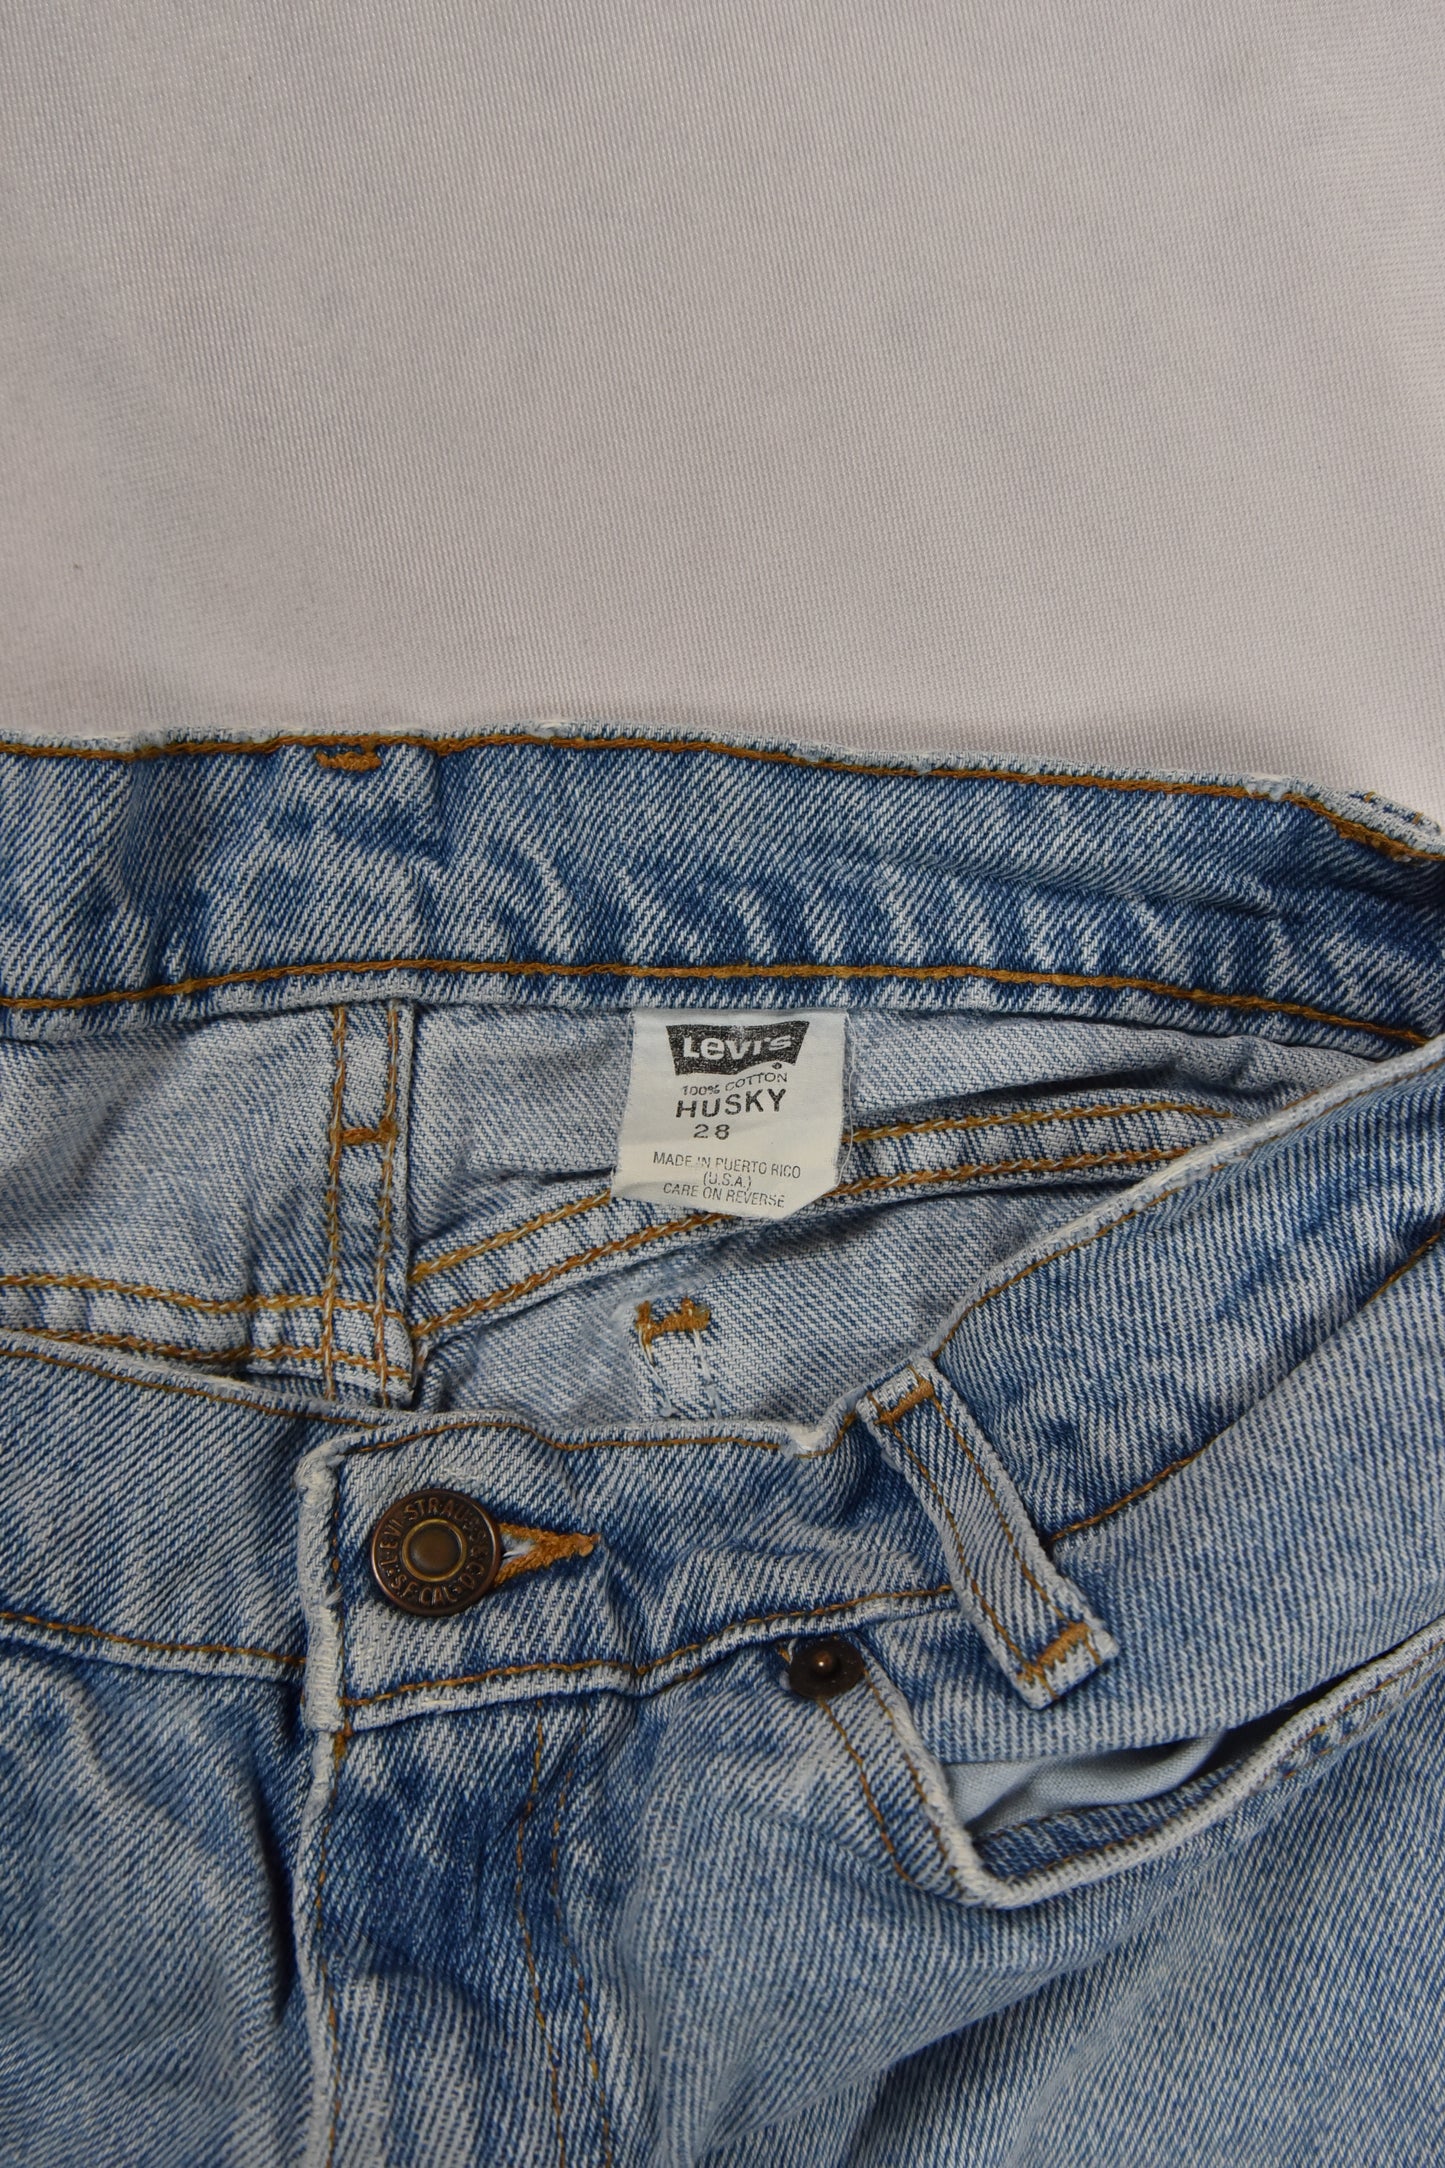 Levi's 550 Orange Tab Cropped Jeans Made in USA Vintage / 28